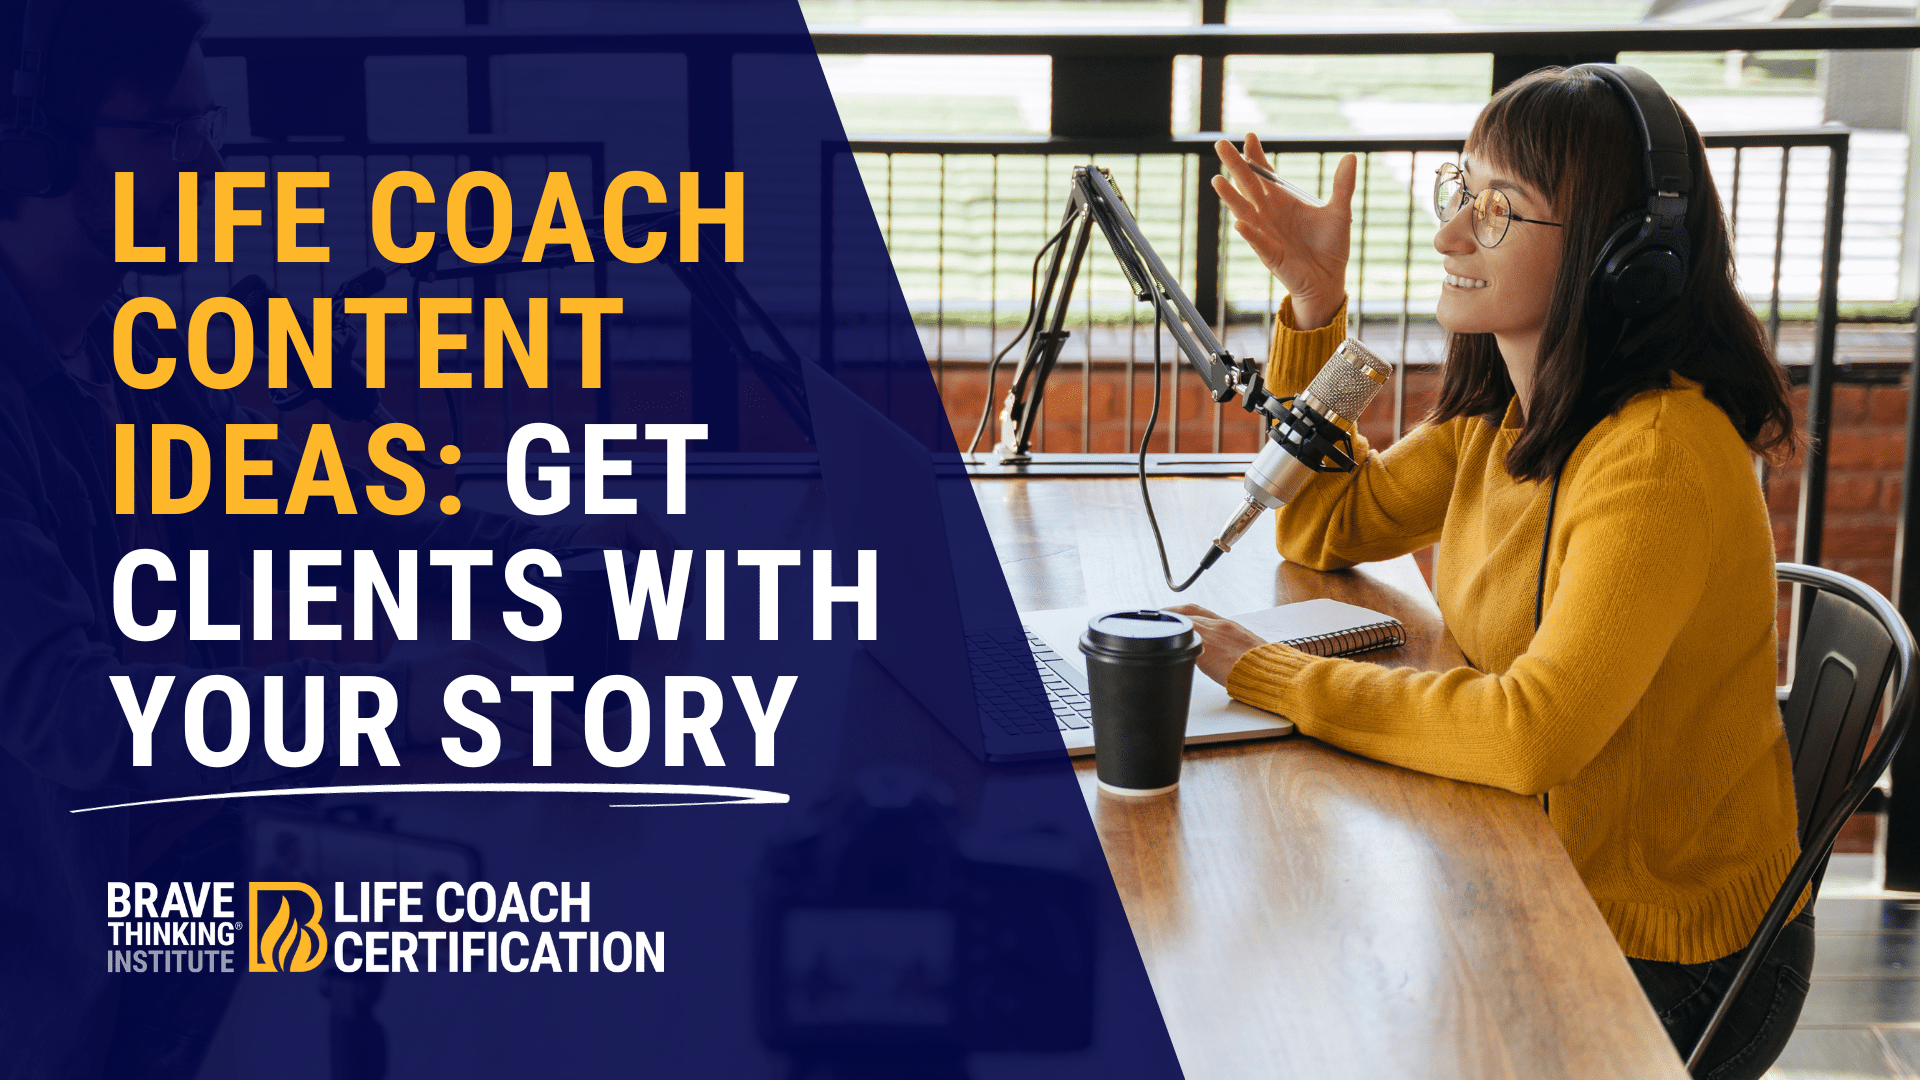 Life Coach Content Ideas | Get Coaching Clients with Your Story